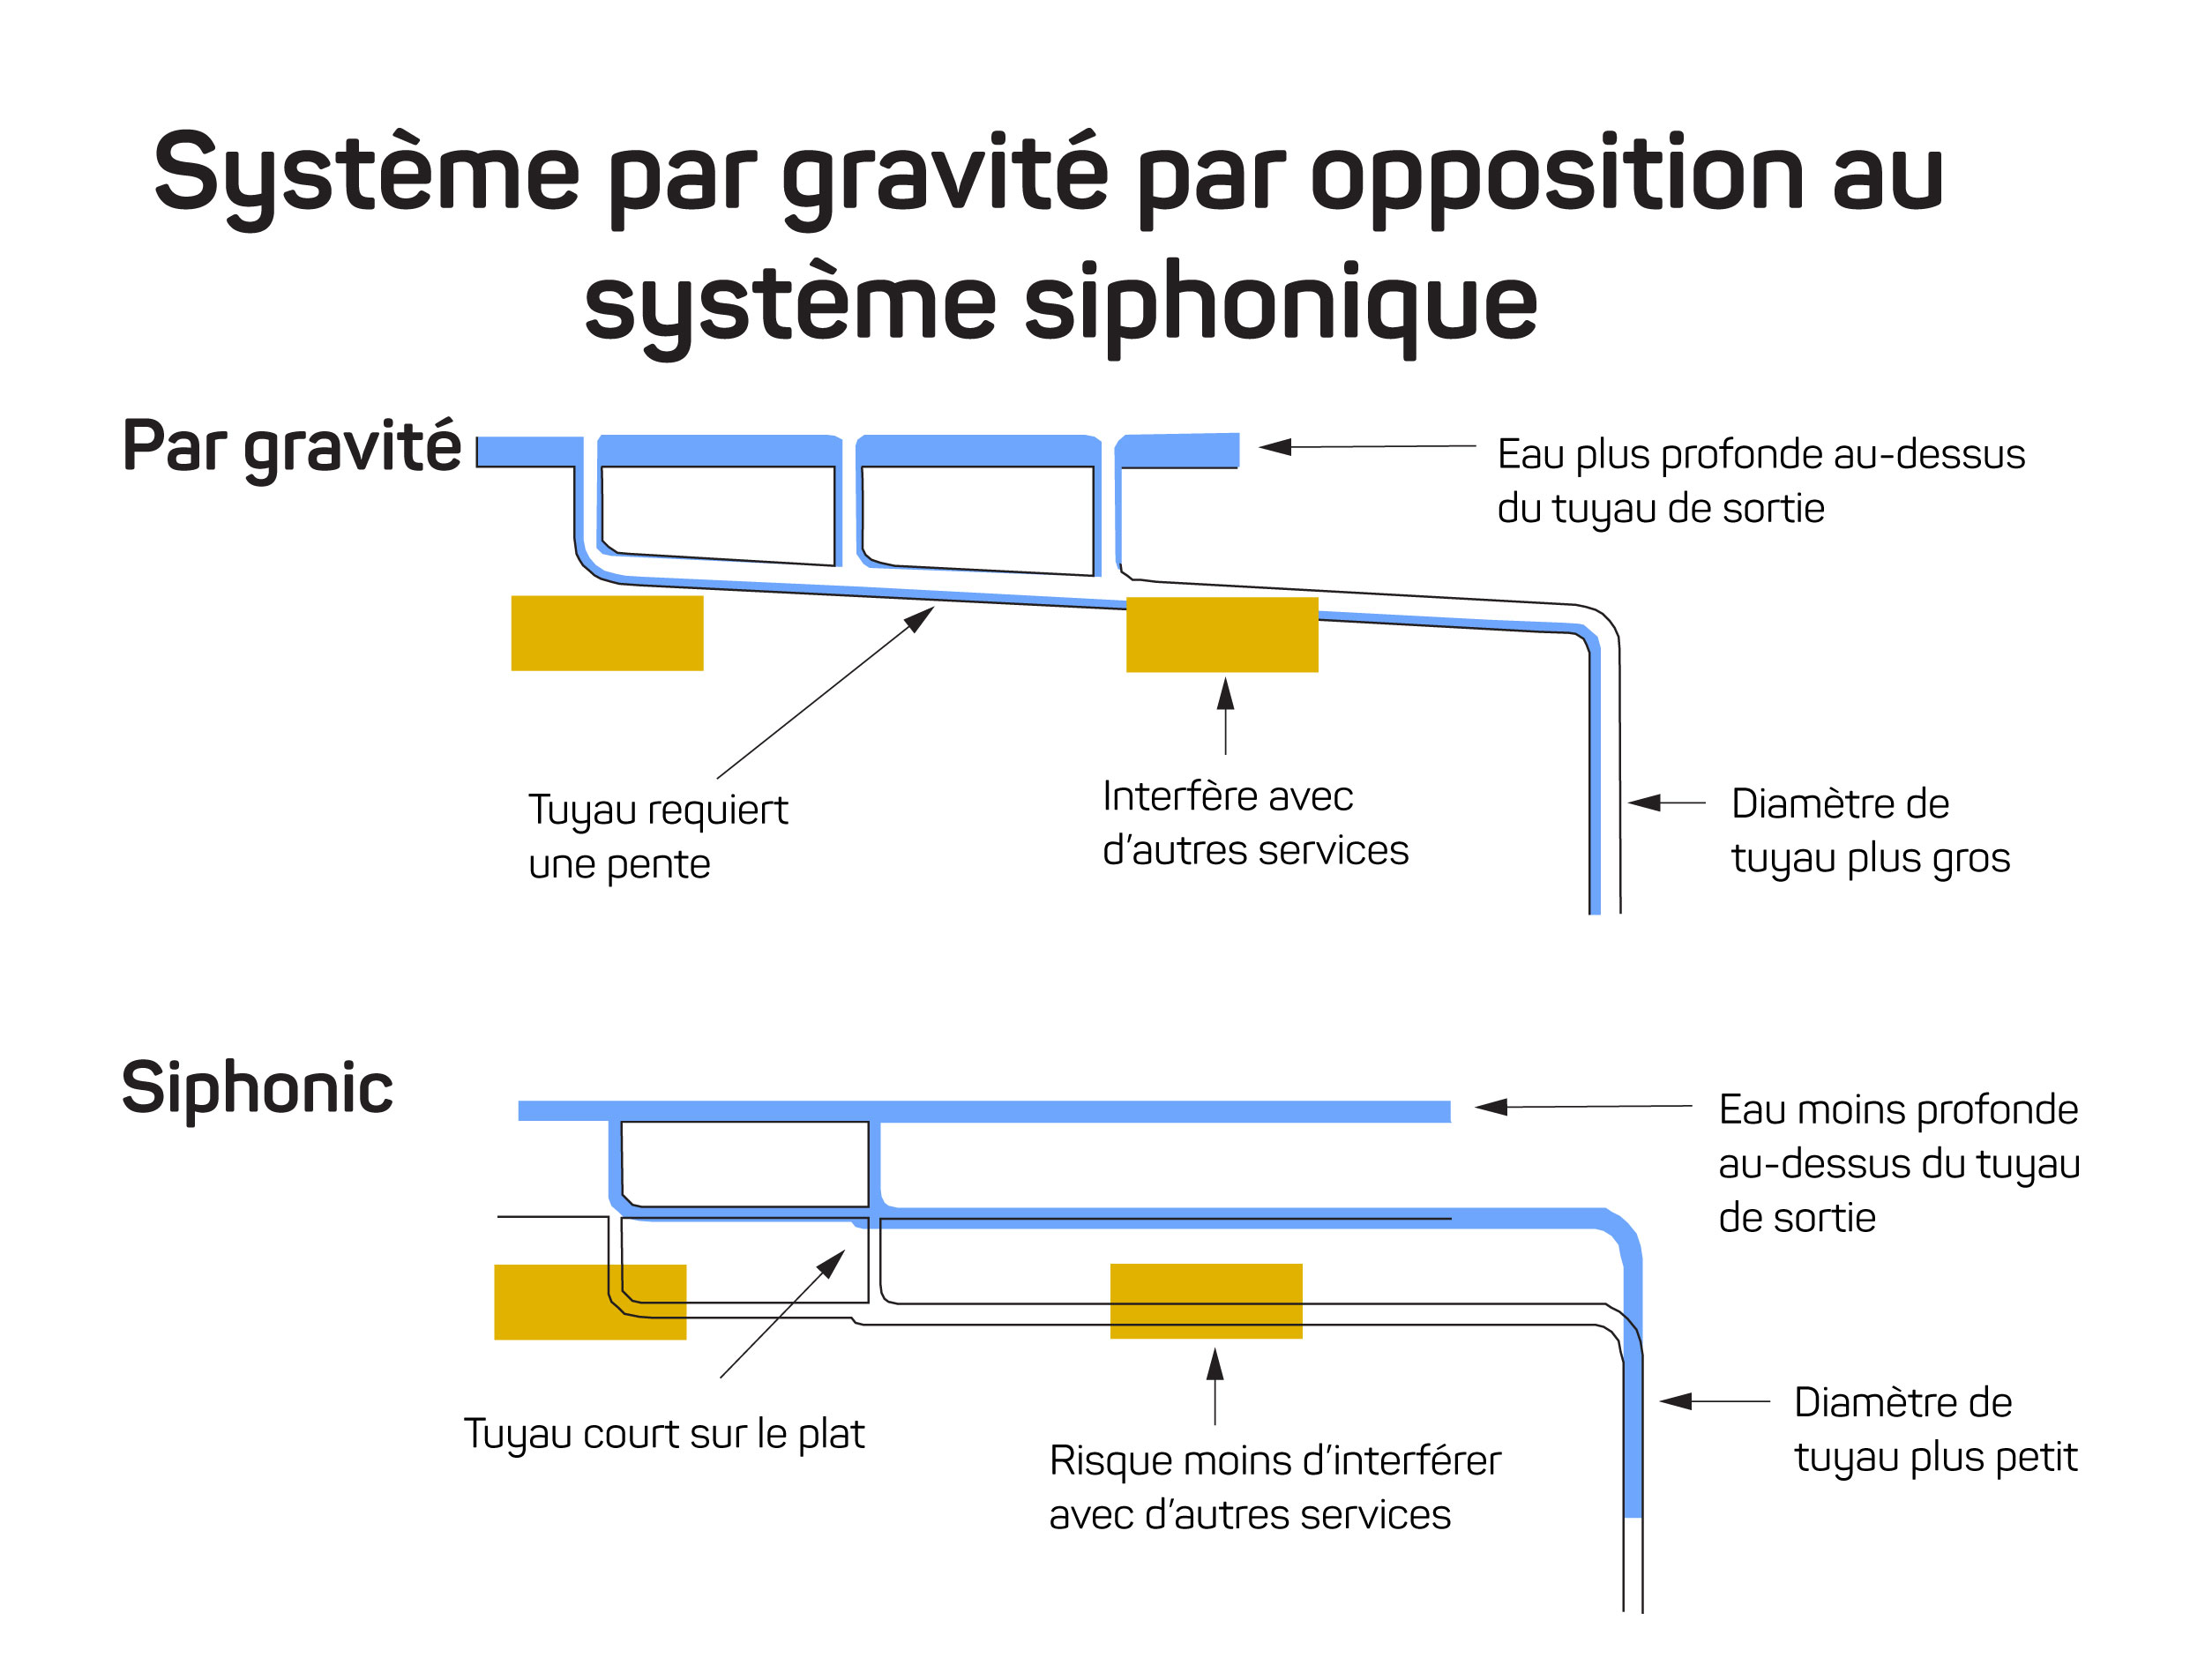 Gravidy drains vs. siphonic drainage systems 